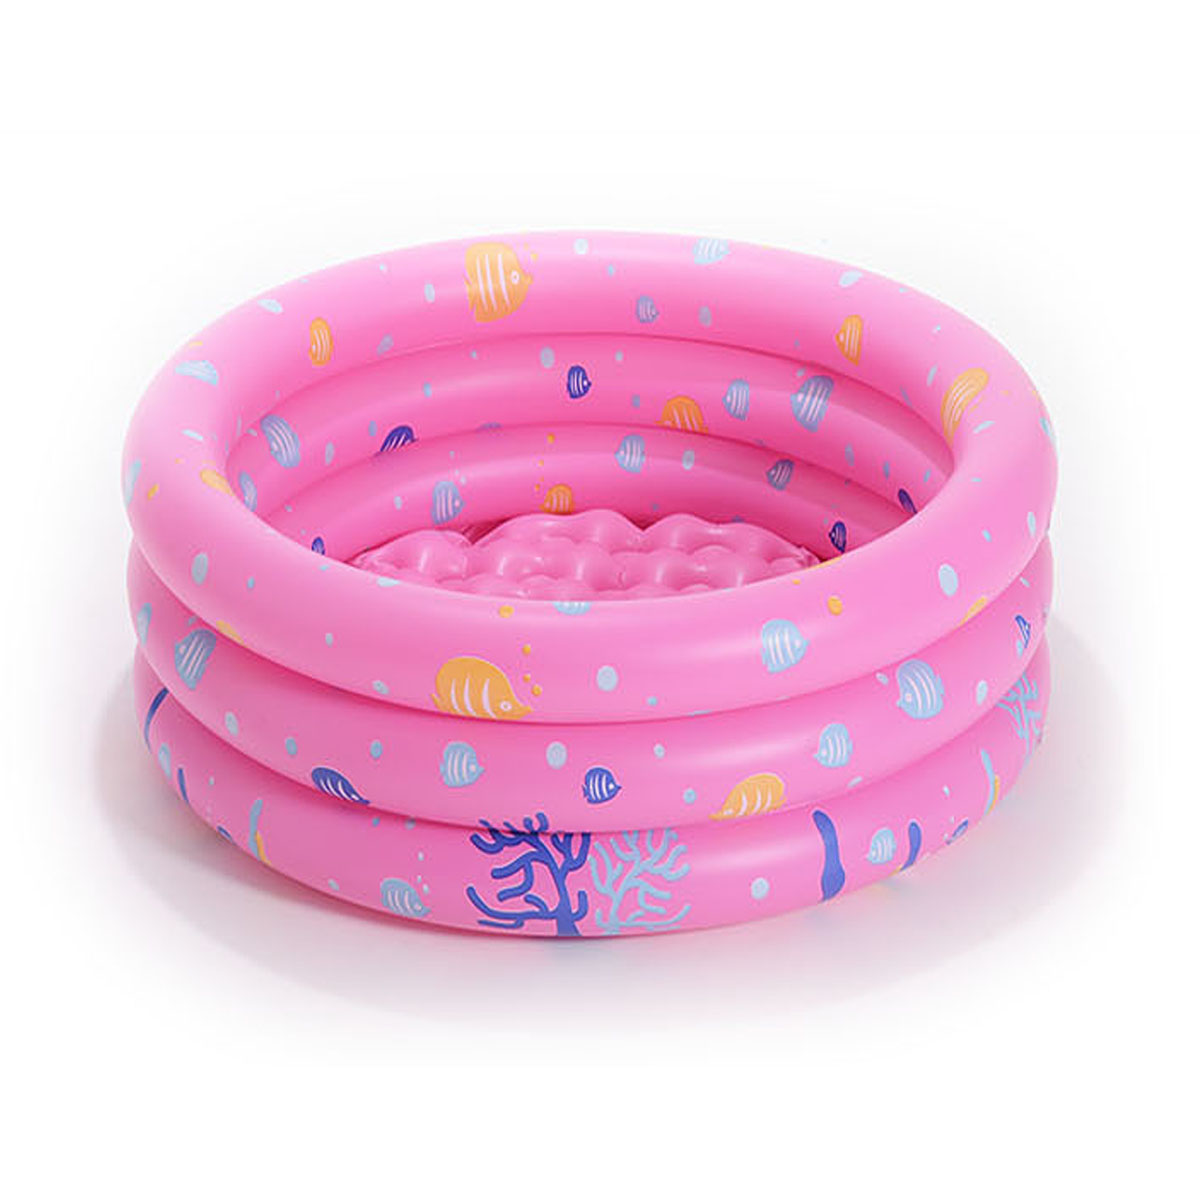 Inflatable-Swimming-Pool-Portable-Outdoor-Children-Basin-Bathtub-Kids-Pool-Baby-Swimming-Pool-Water--1528022-3